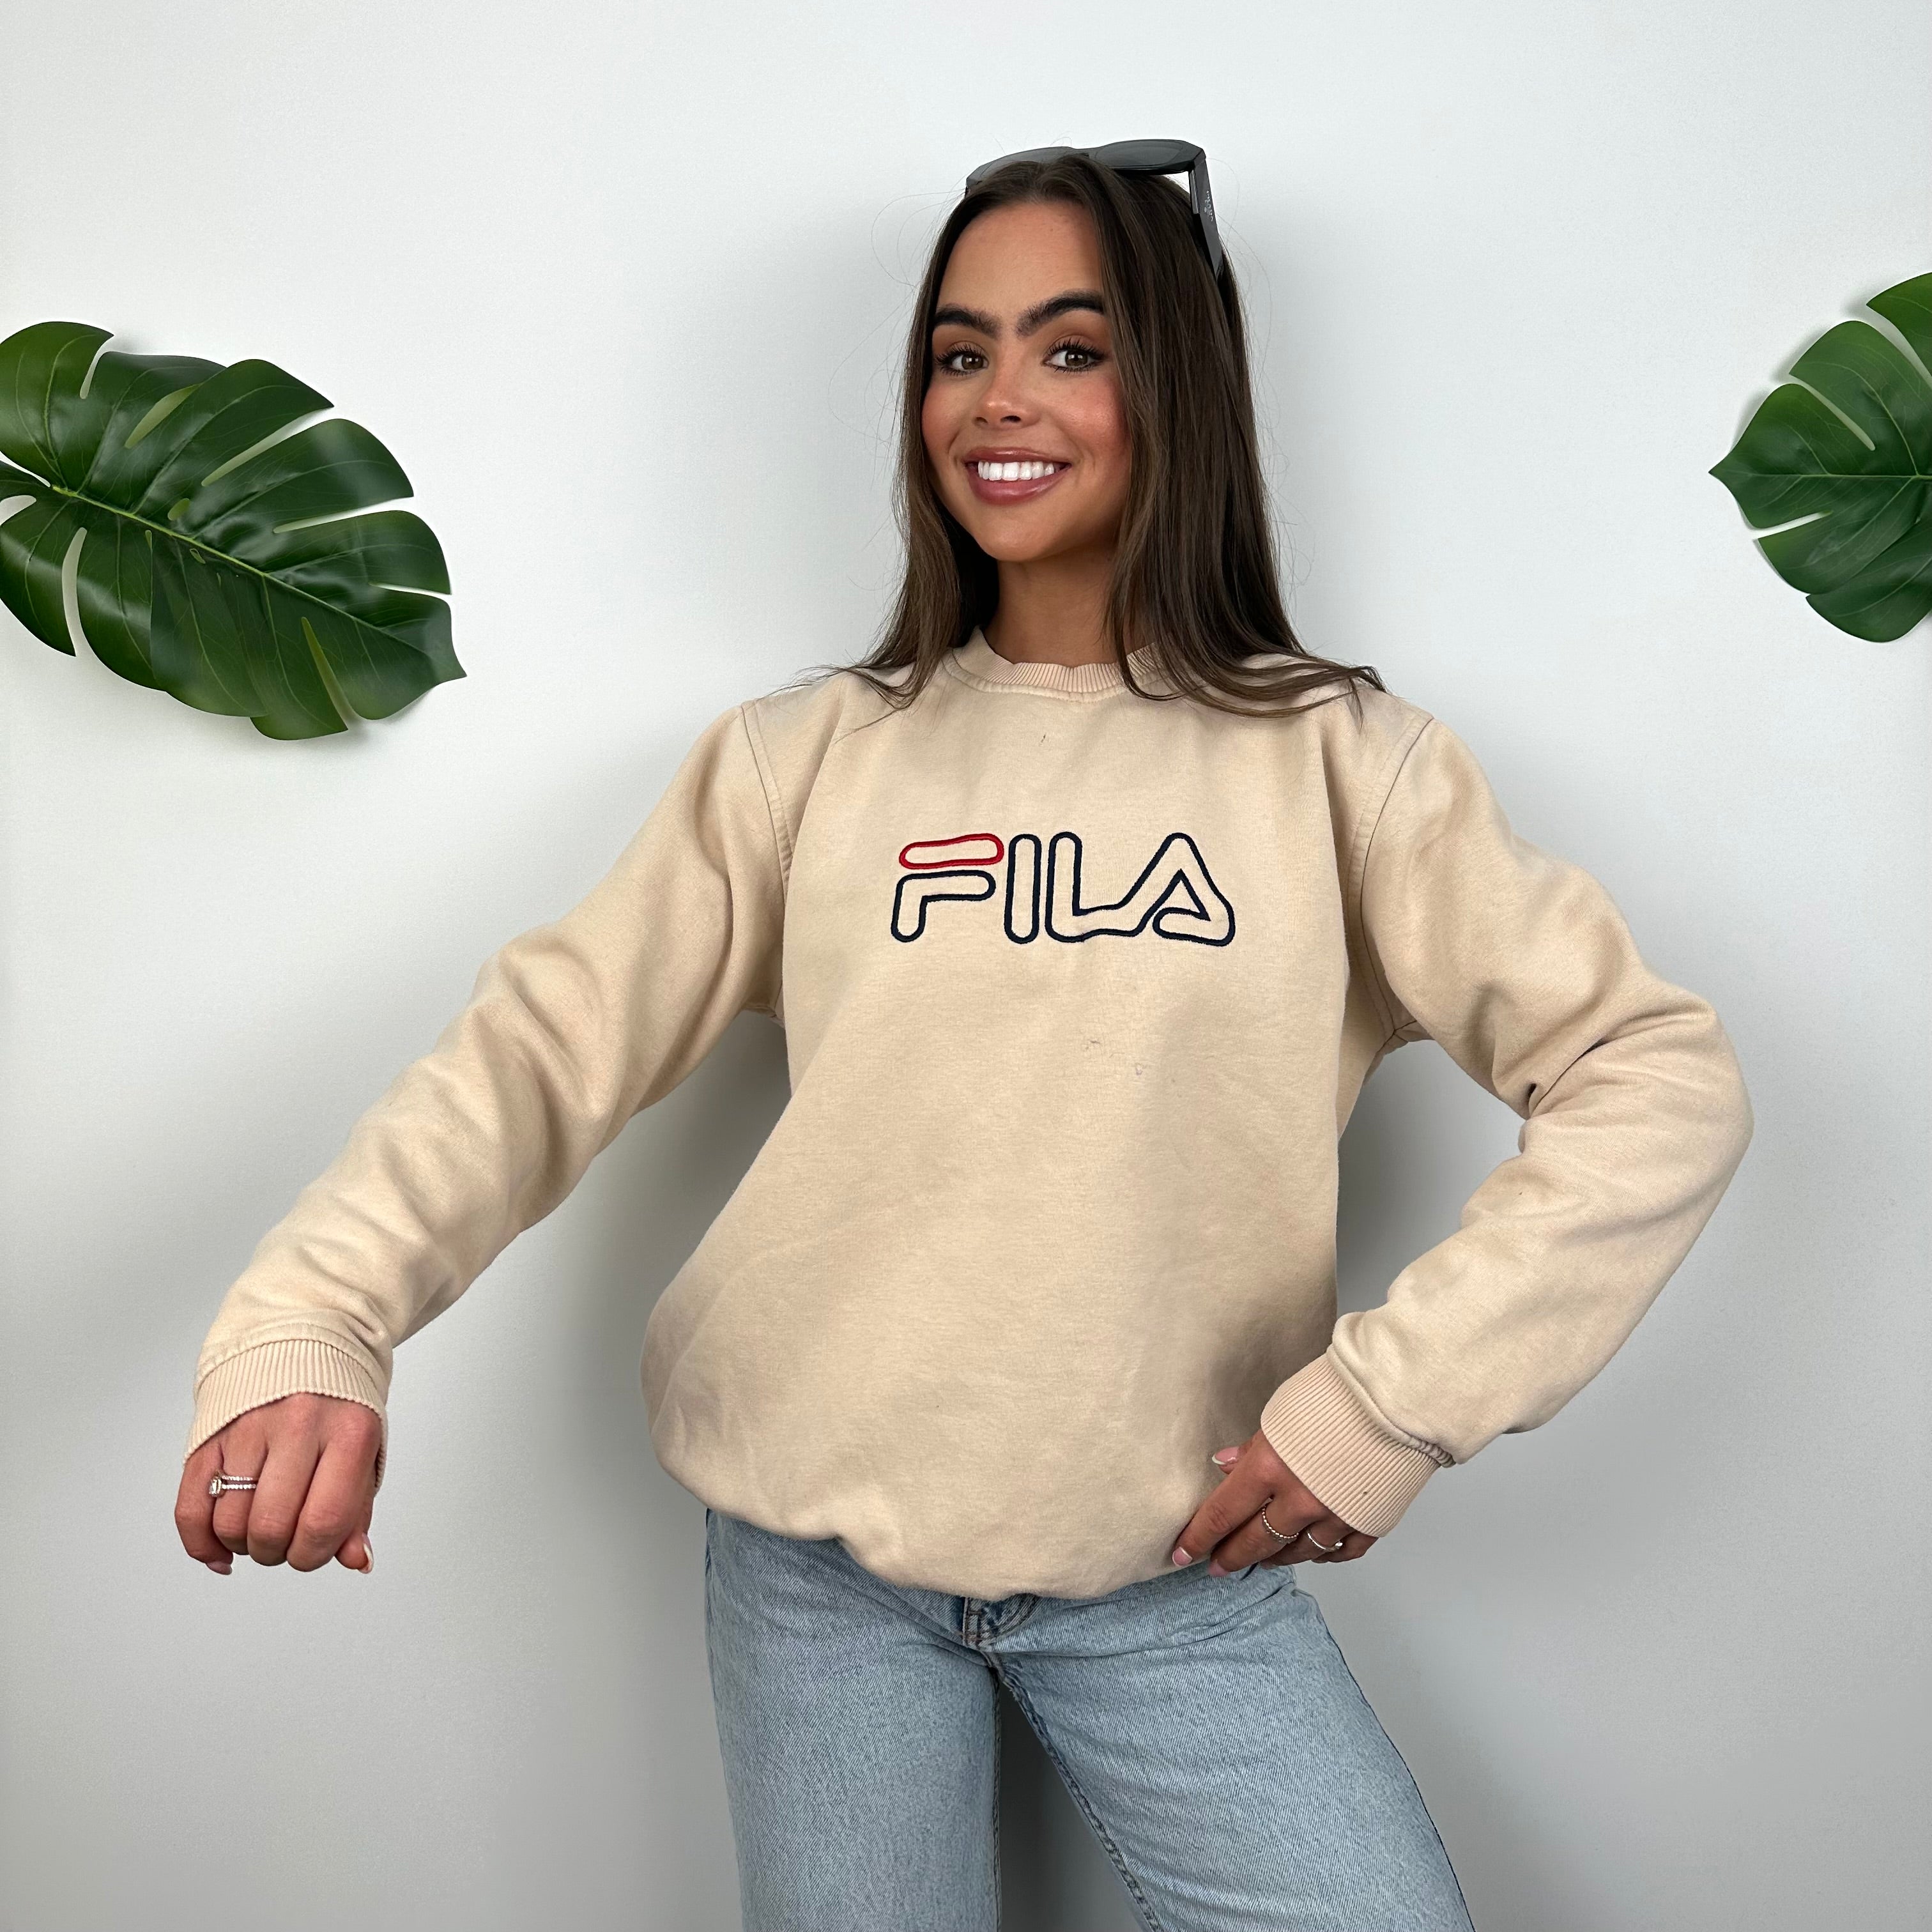 FILA Tan Brown Embroidered Spell Out Sweatshirt (M)